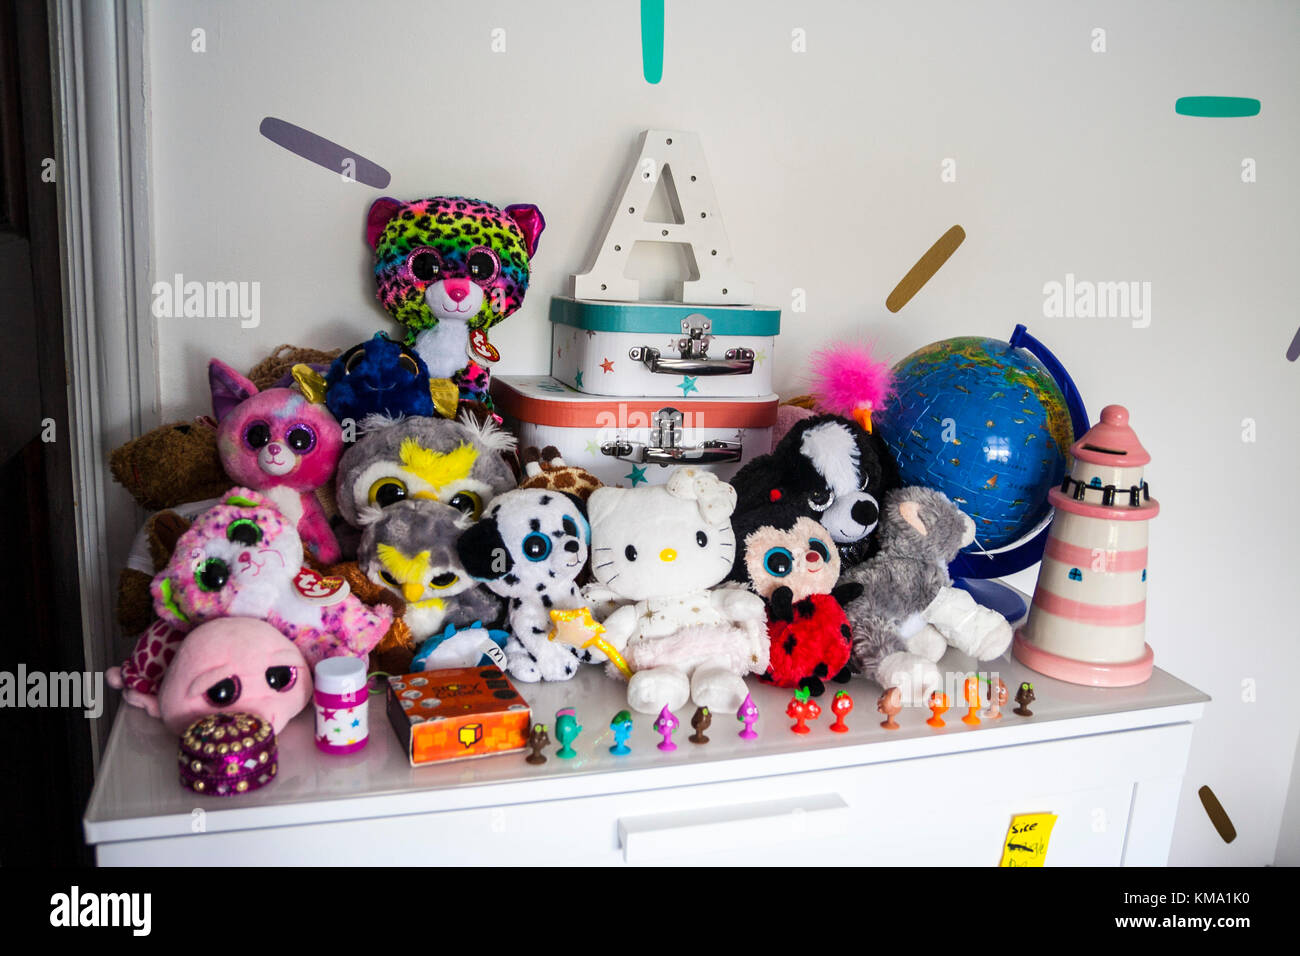 Toys on a shelf in a child's bedroom, TY beanie boo, lighthouse money box, globe, games Stock Photo